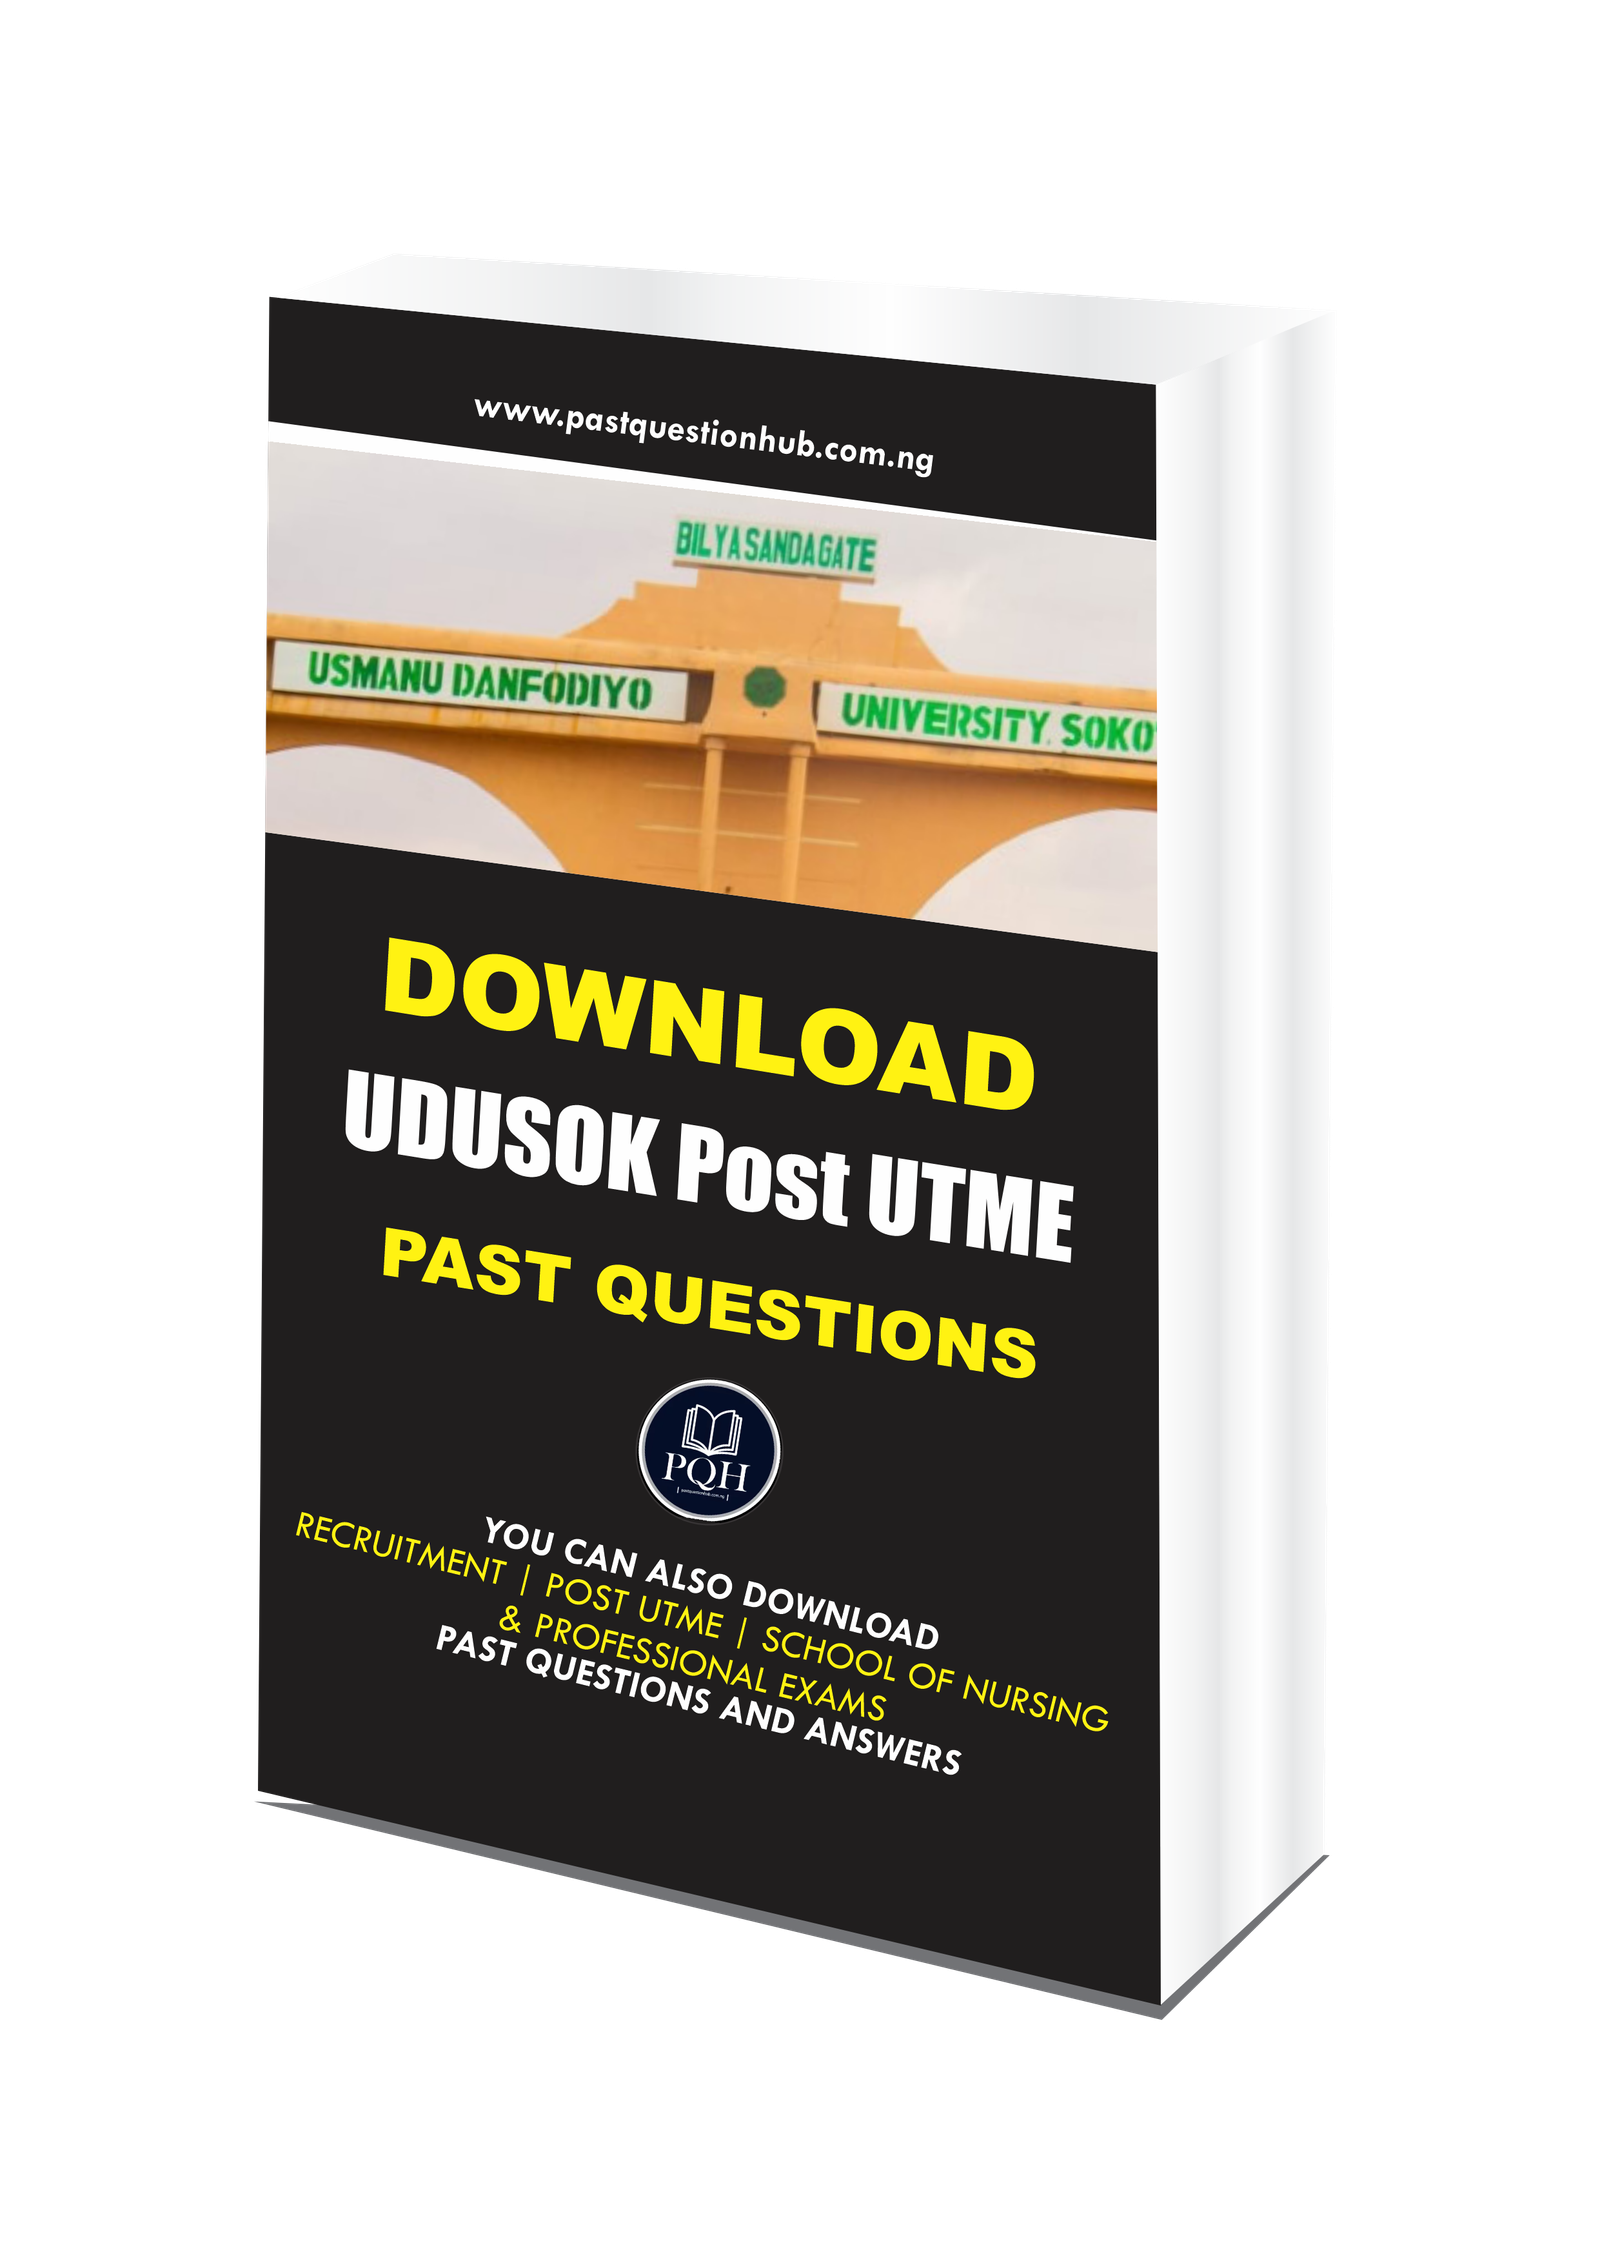 UDUSOK Post UTME Past Questions and Answers PDF